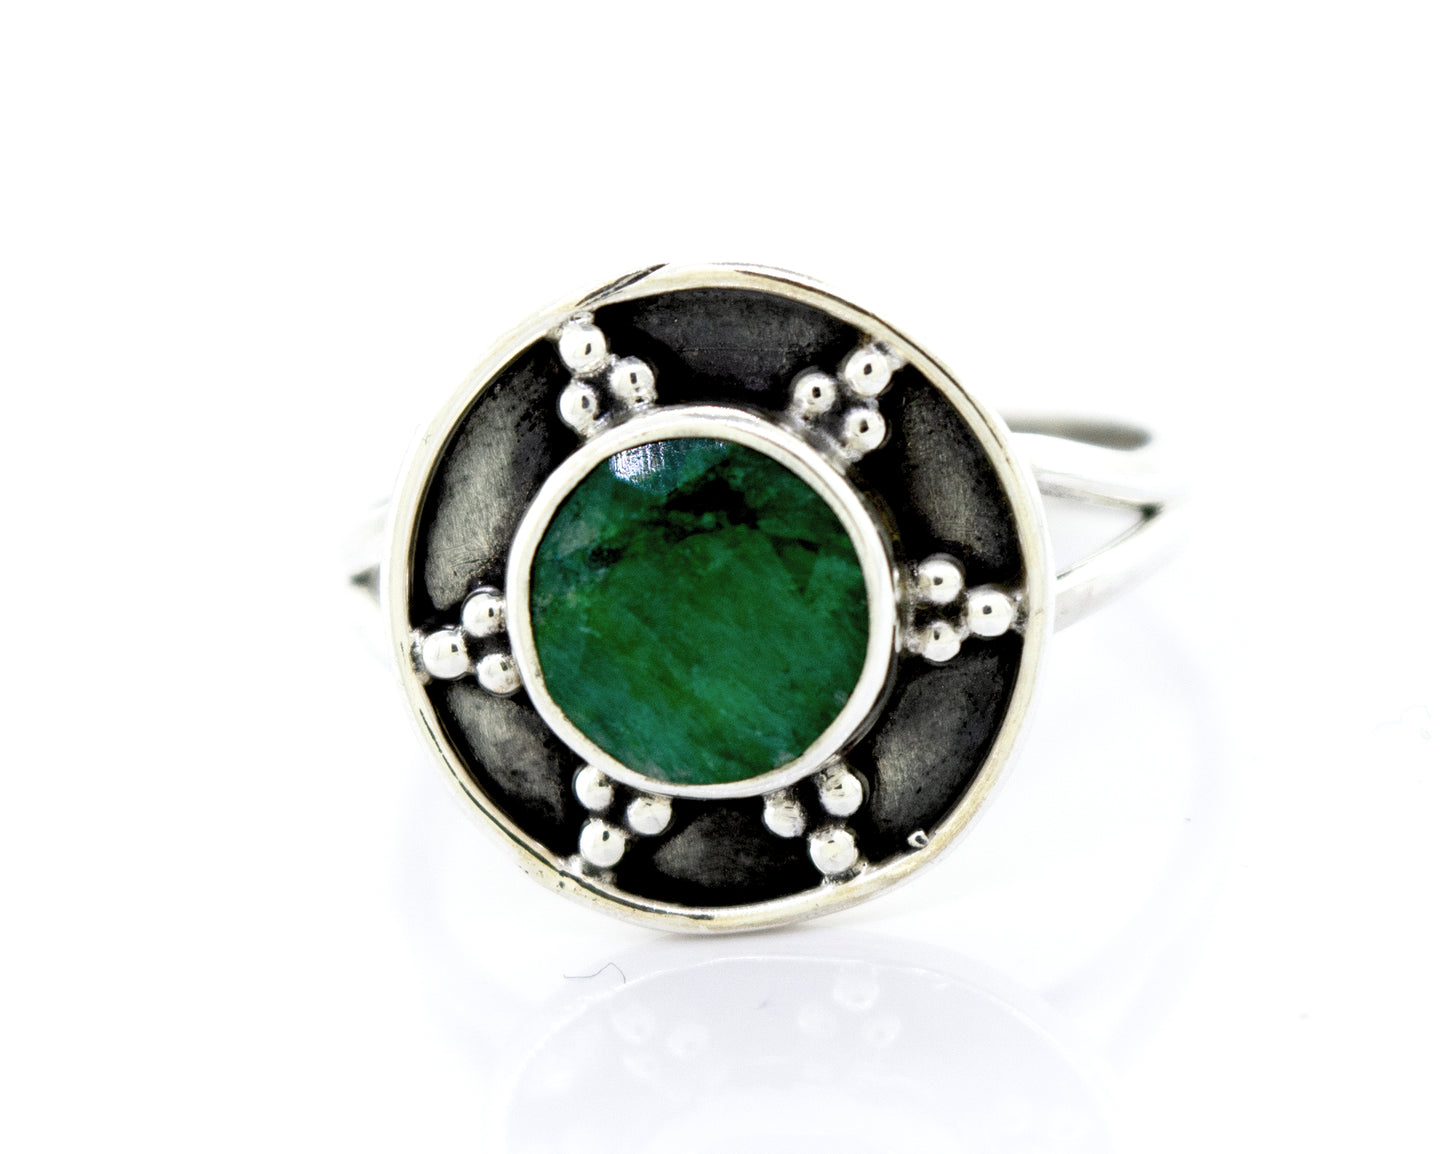 A Super Silver emerald ring with a unique oxidized silver design in the shape of an oval.